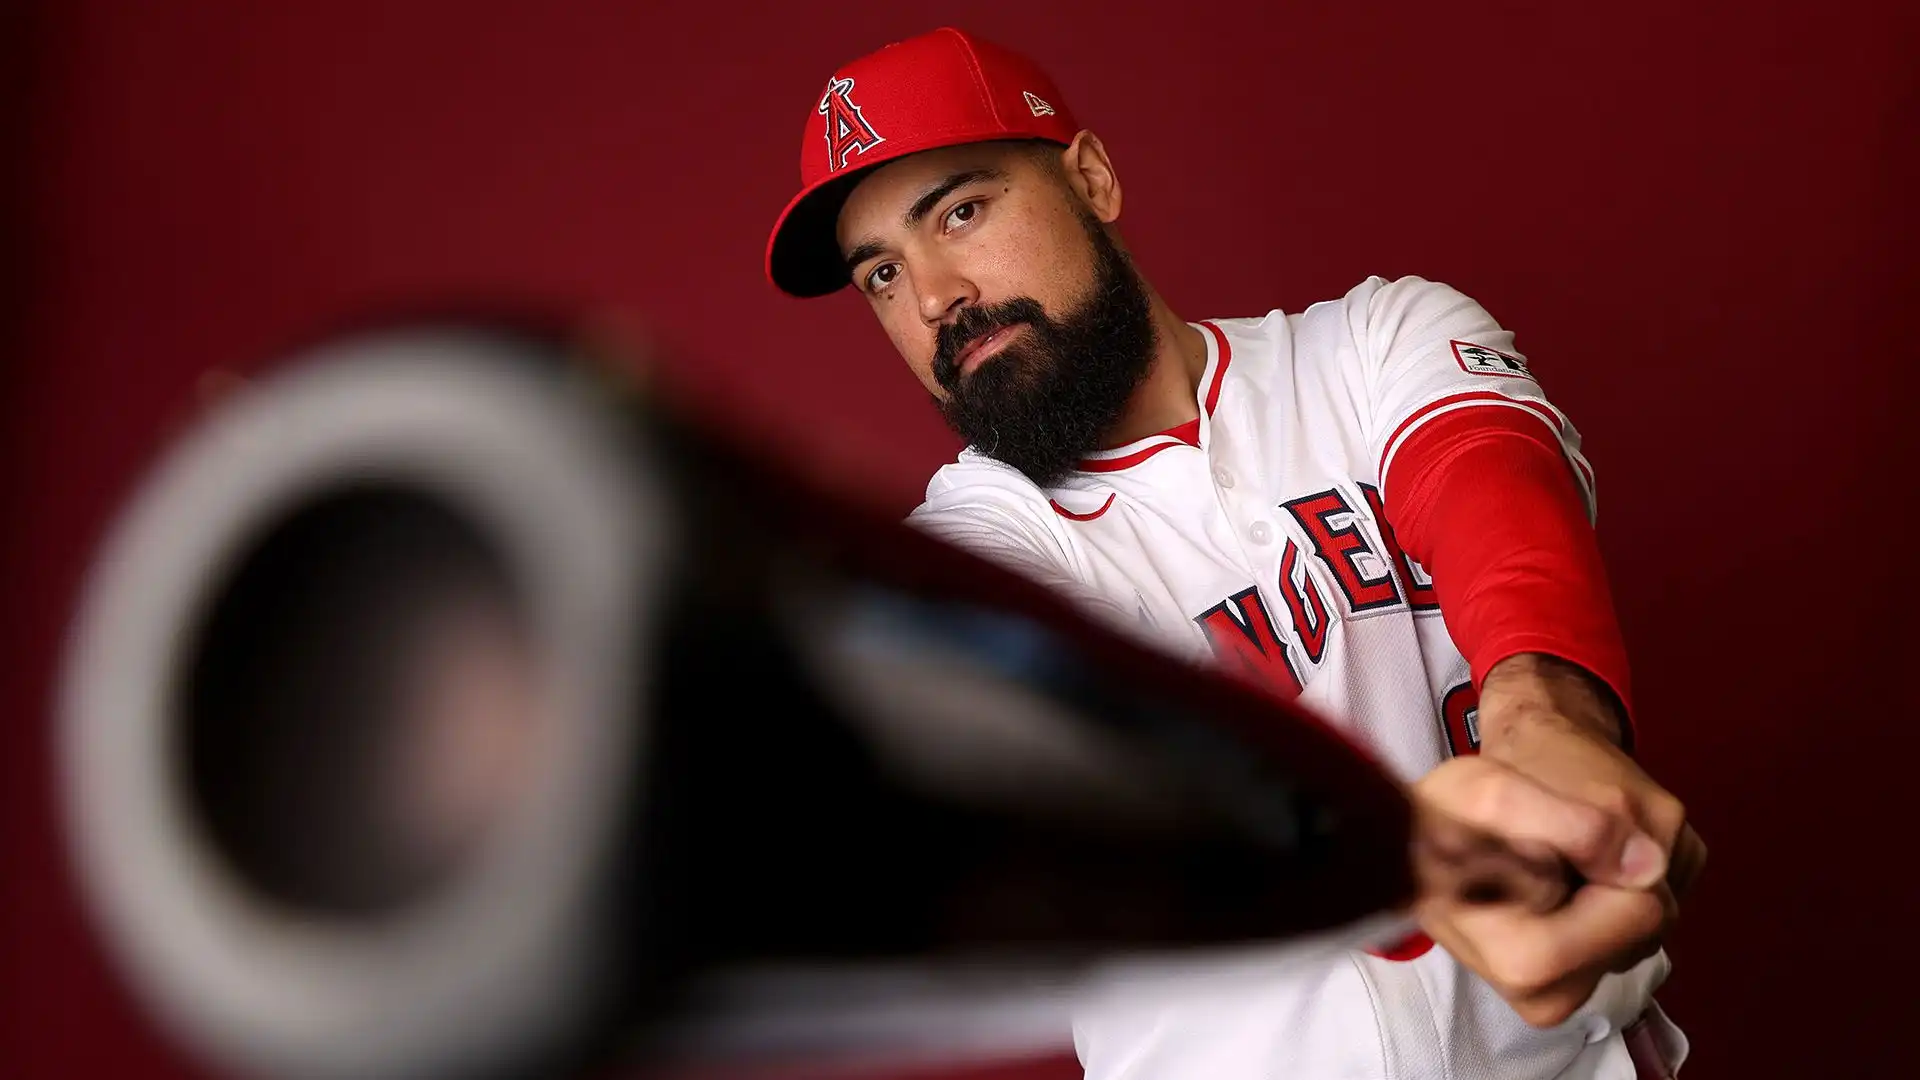 10 Anthony Rendon (Los Angeles Angels): totale guadagni $38.3M